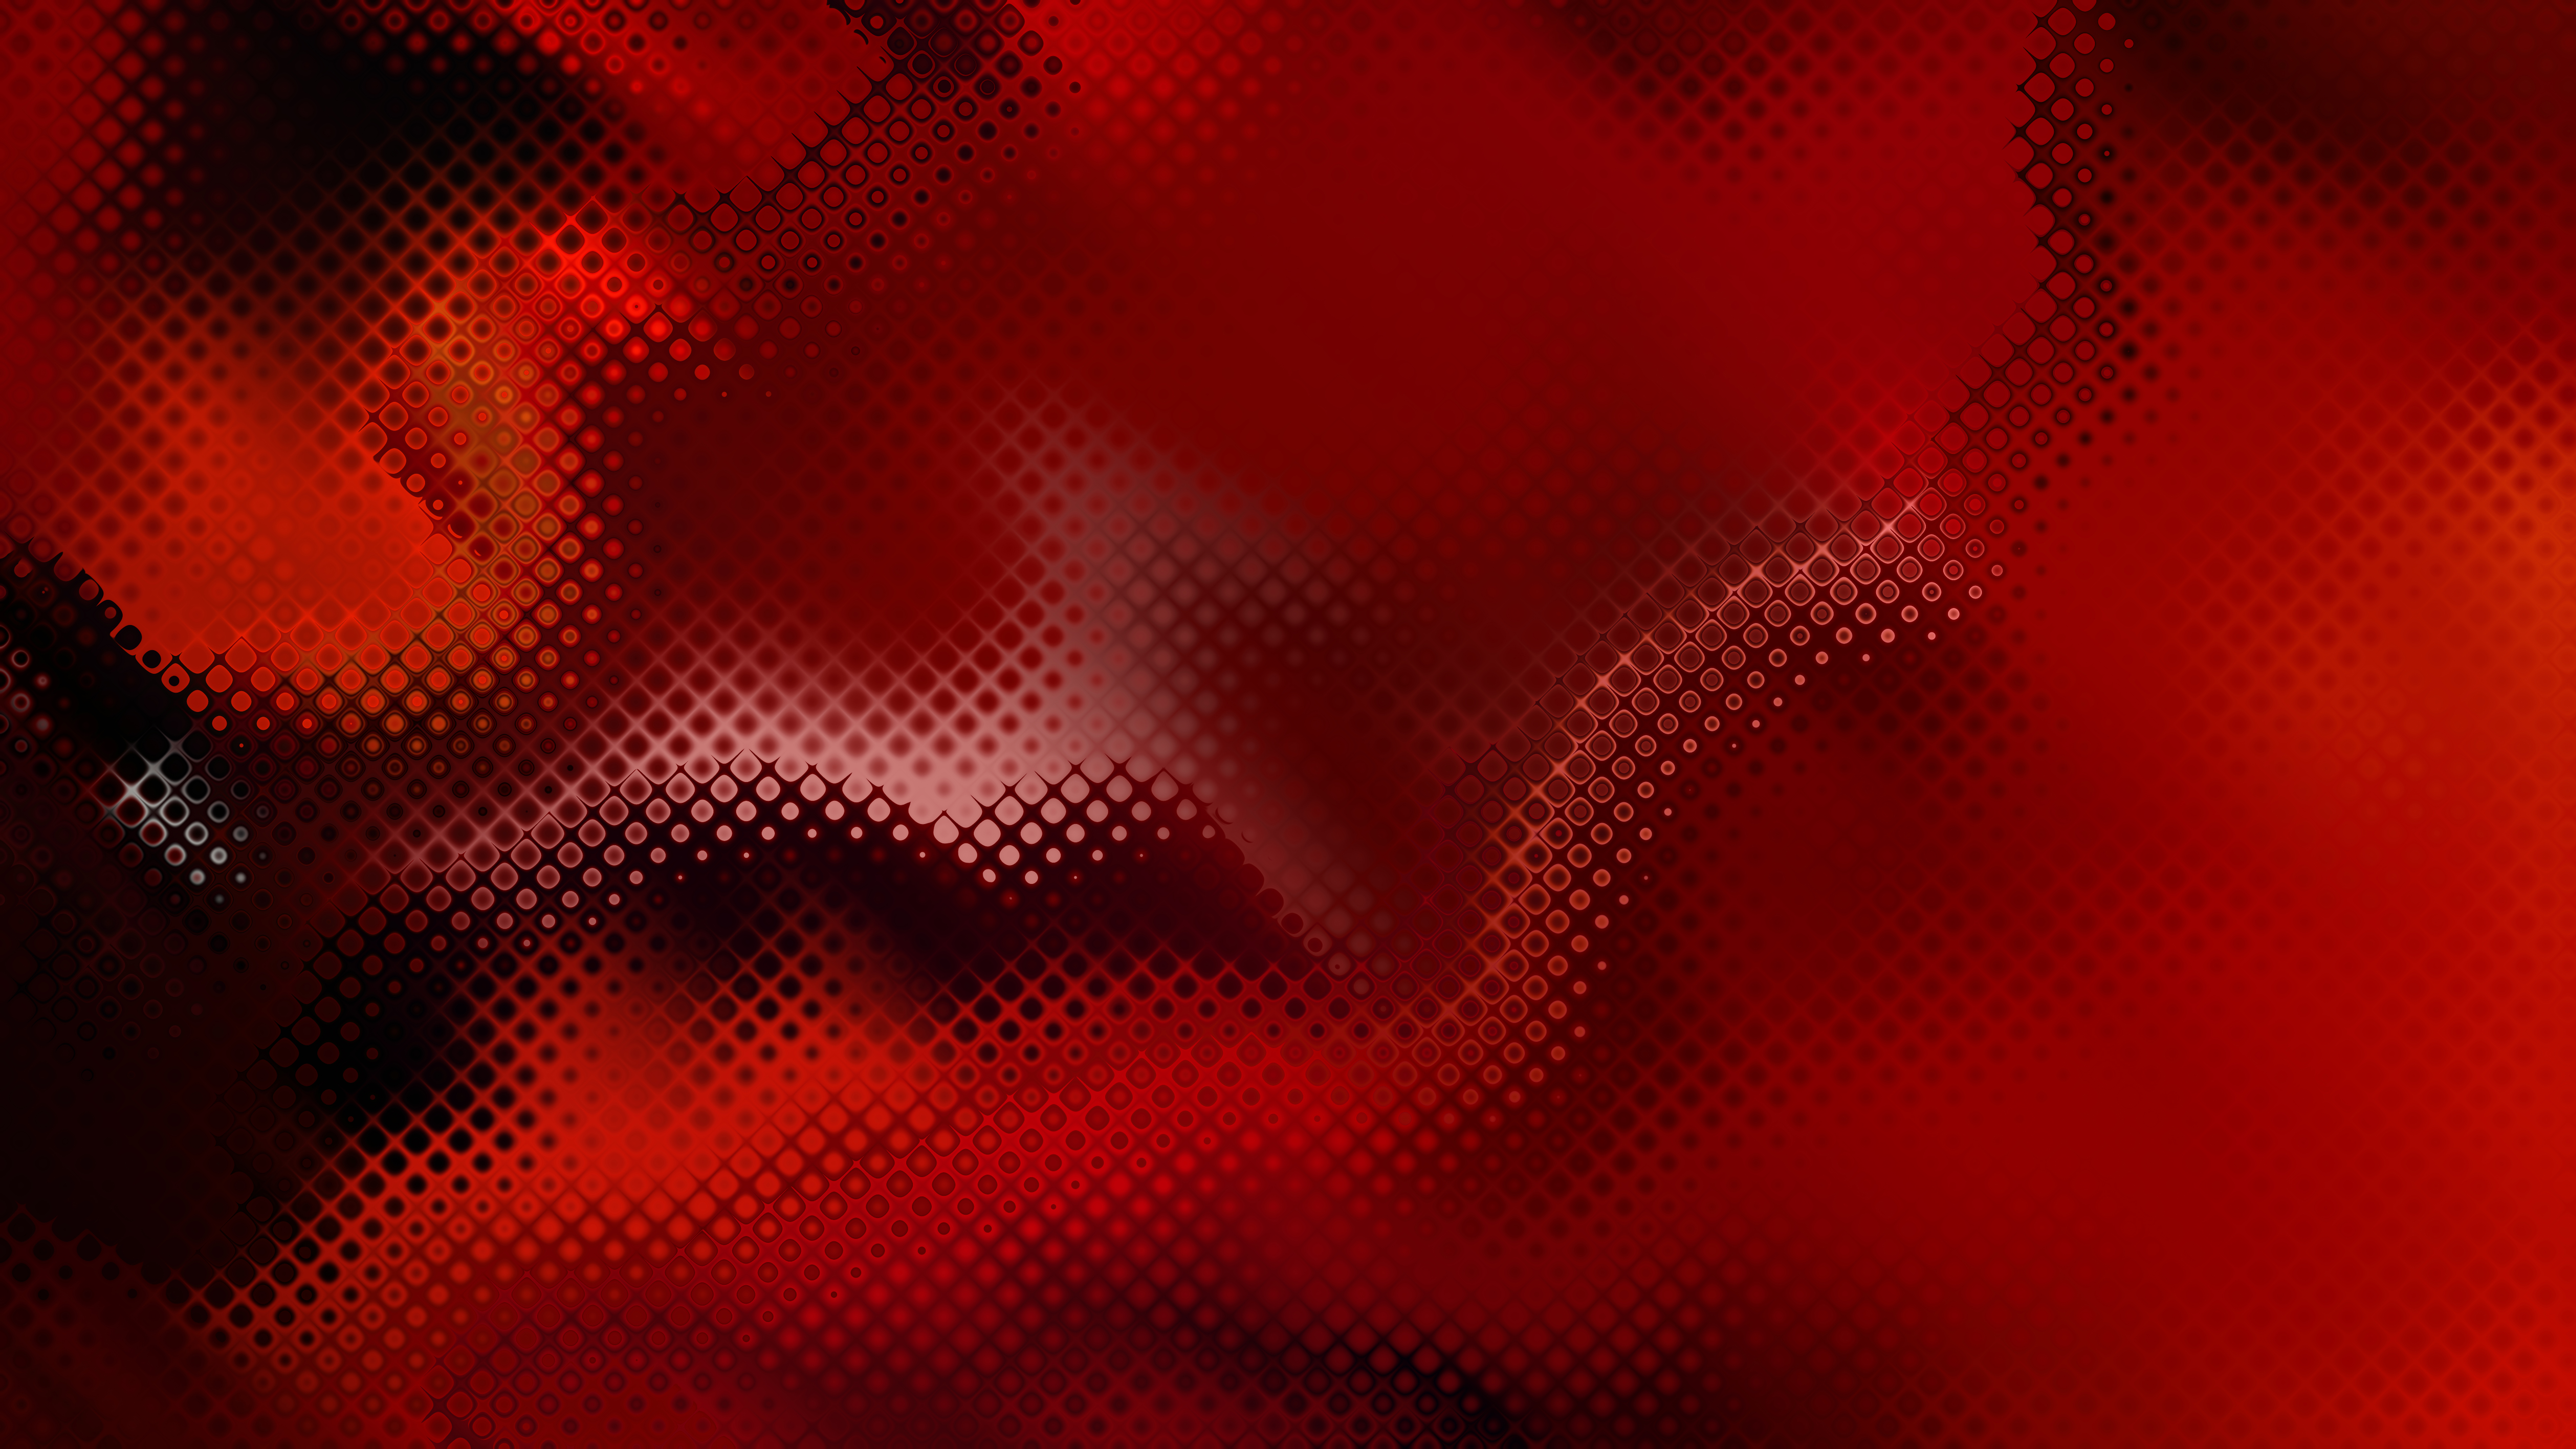 Free Abstract Red and Black Background Image